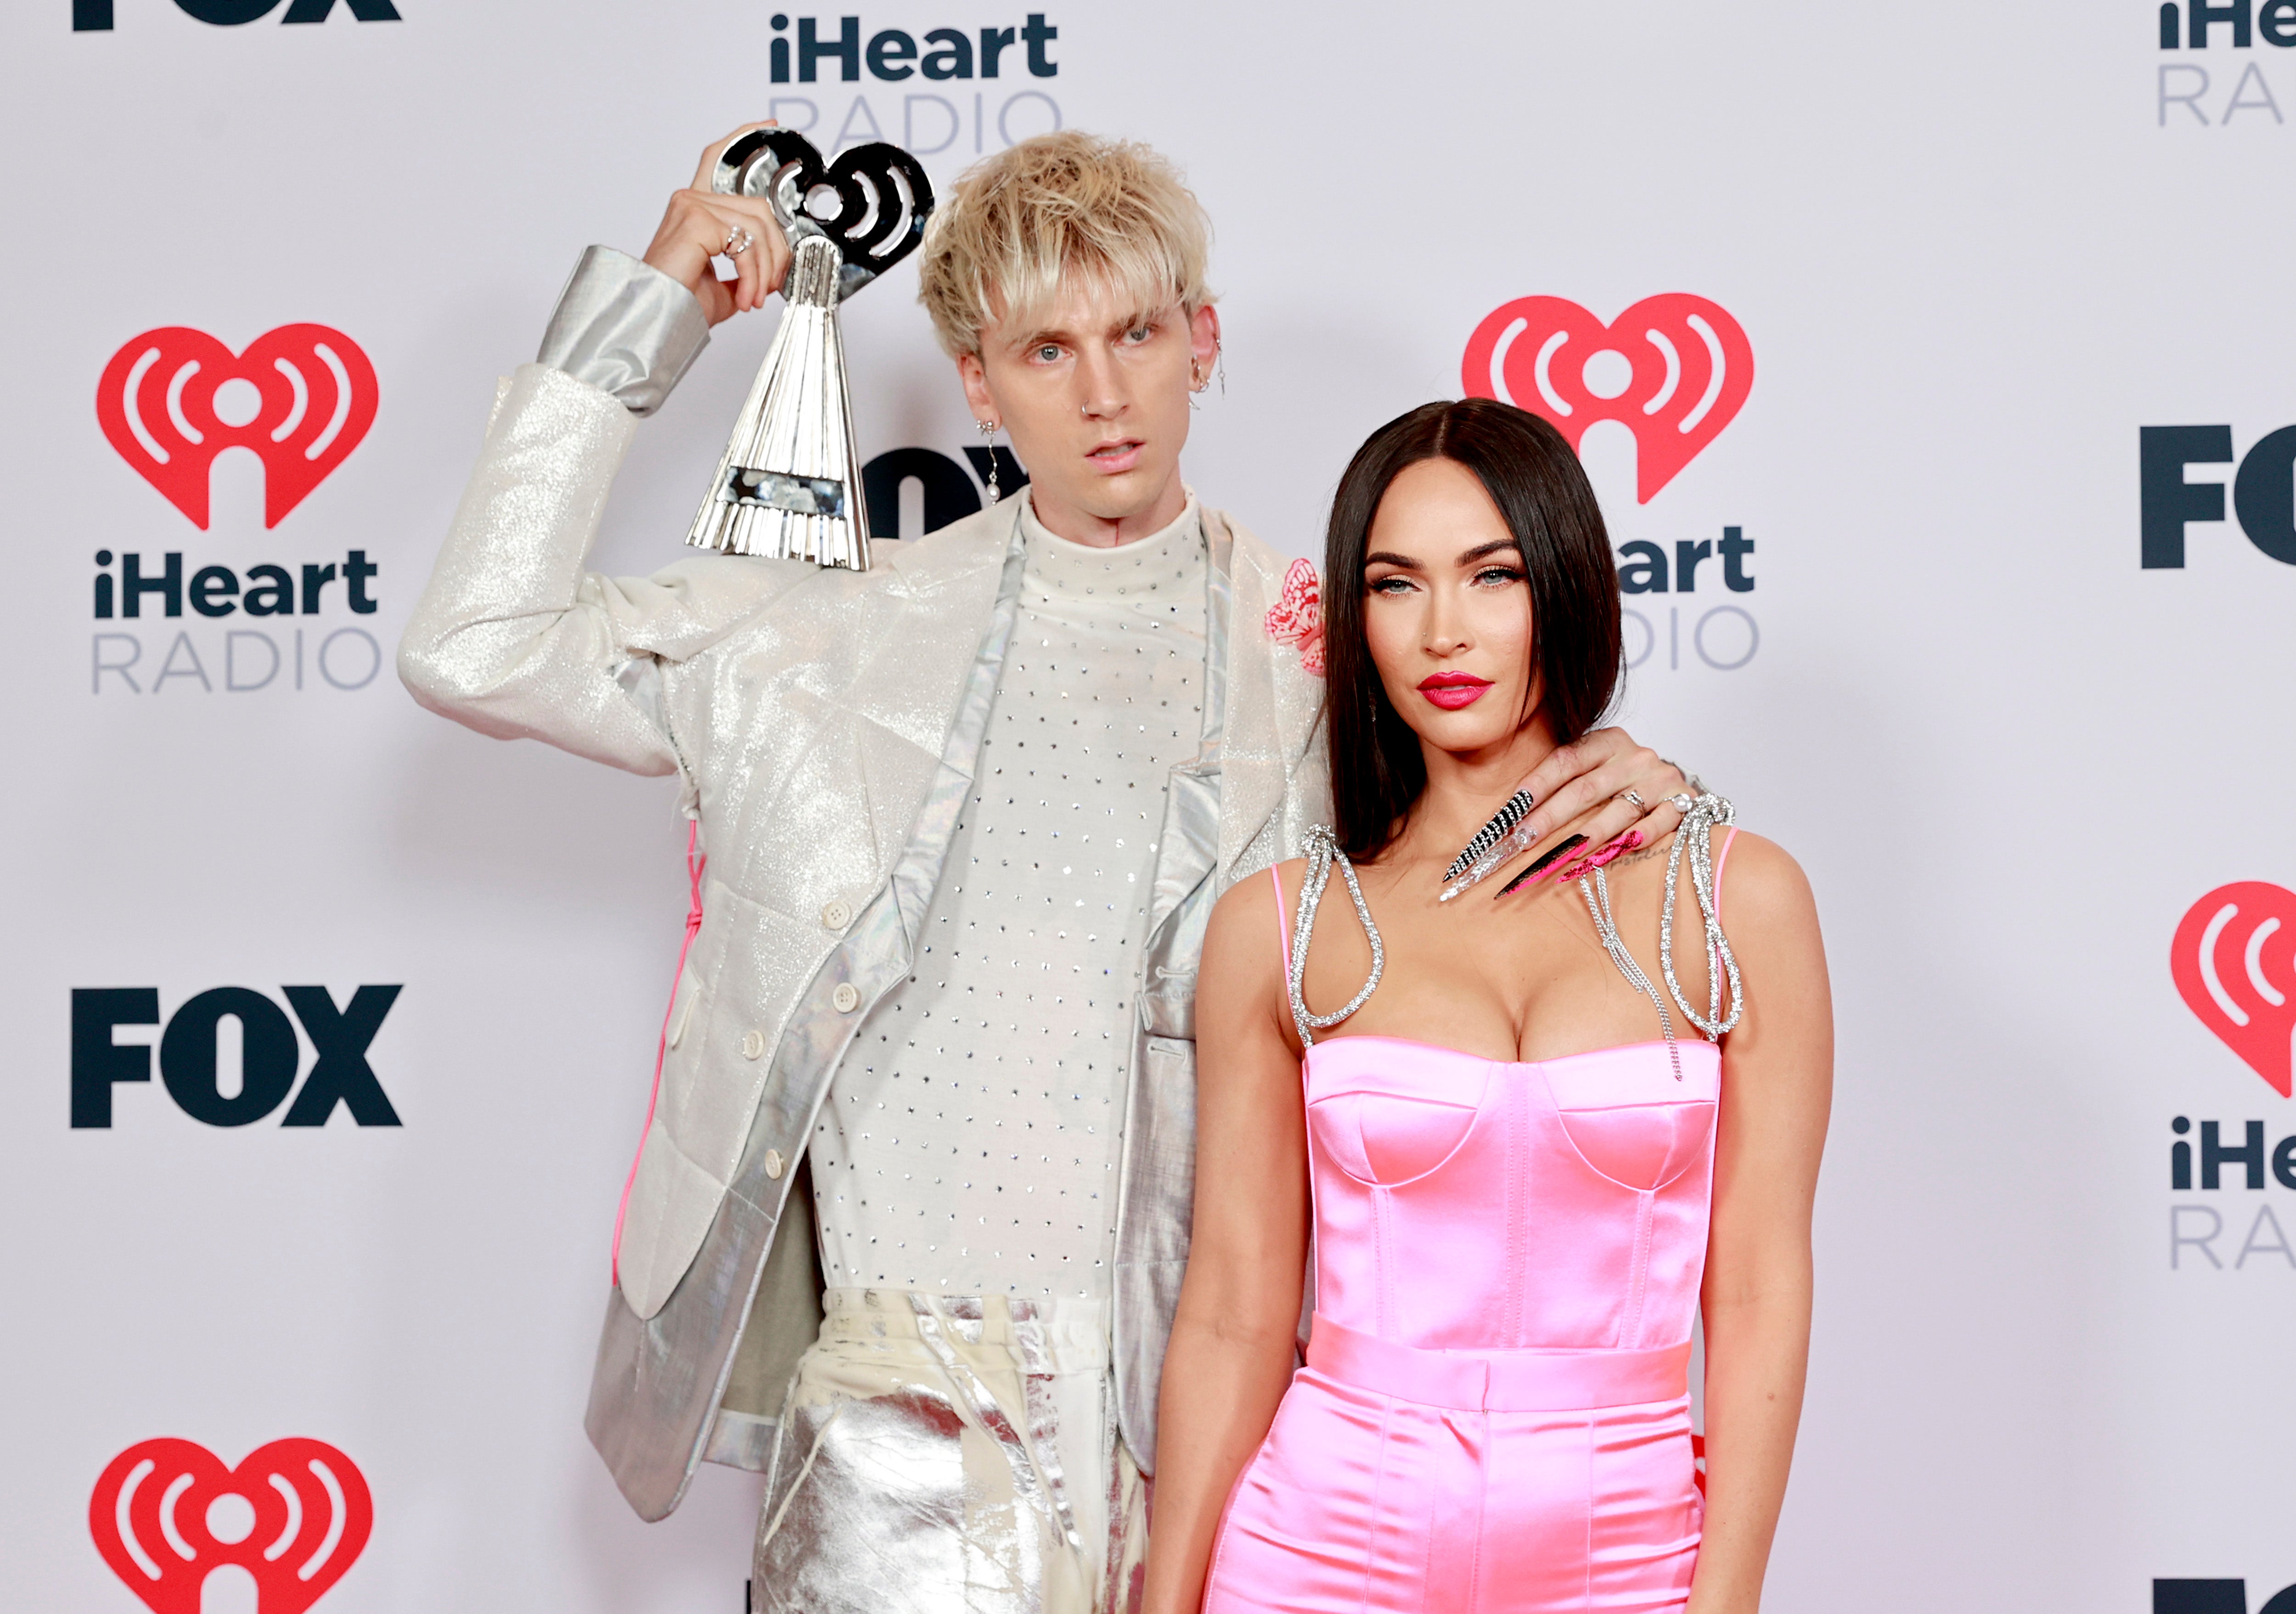 Megan Fox opens up about connection with Machine Gun Kelly